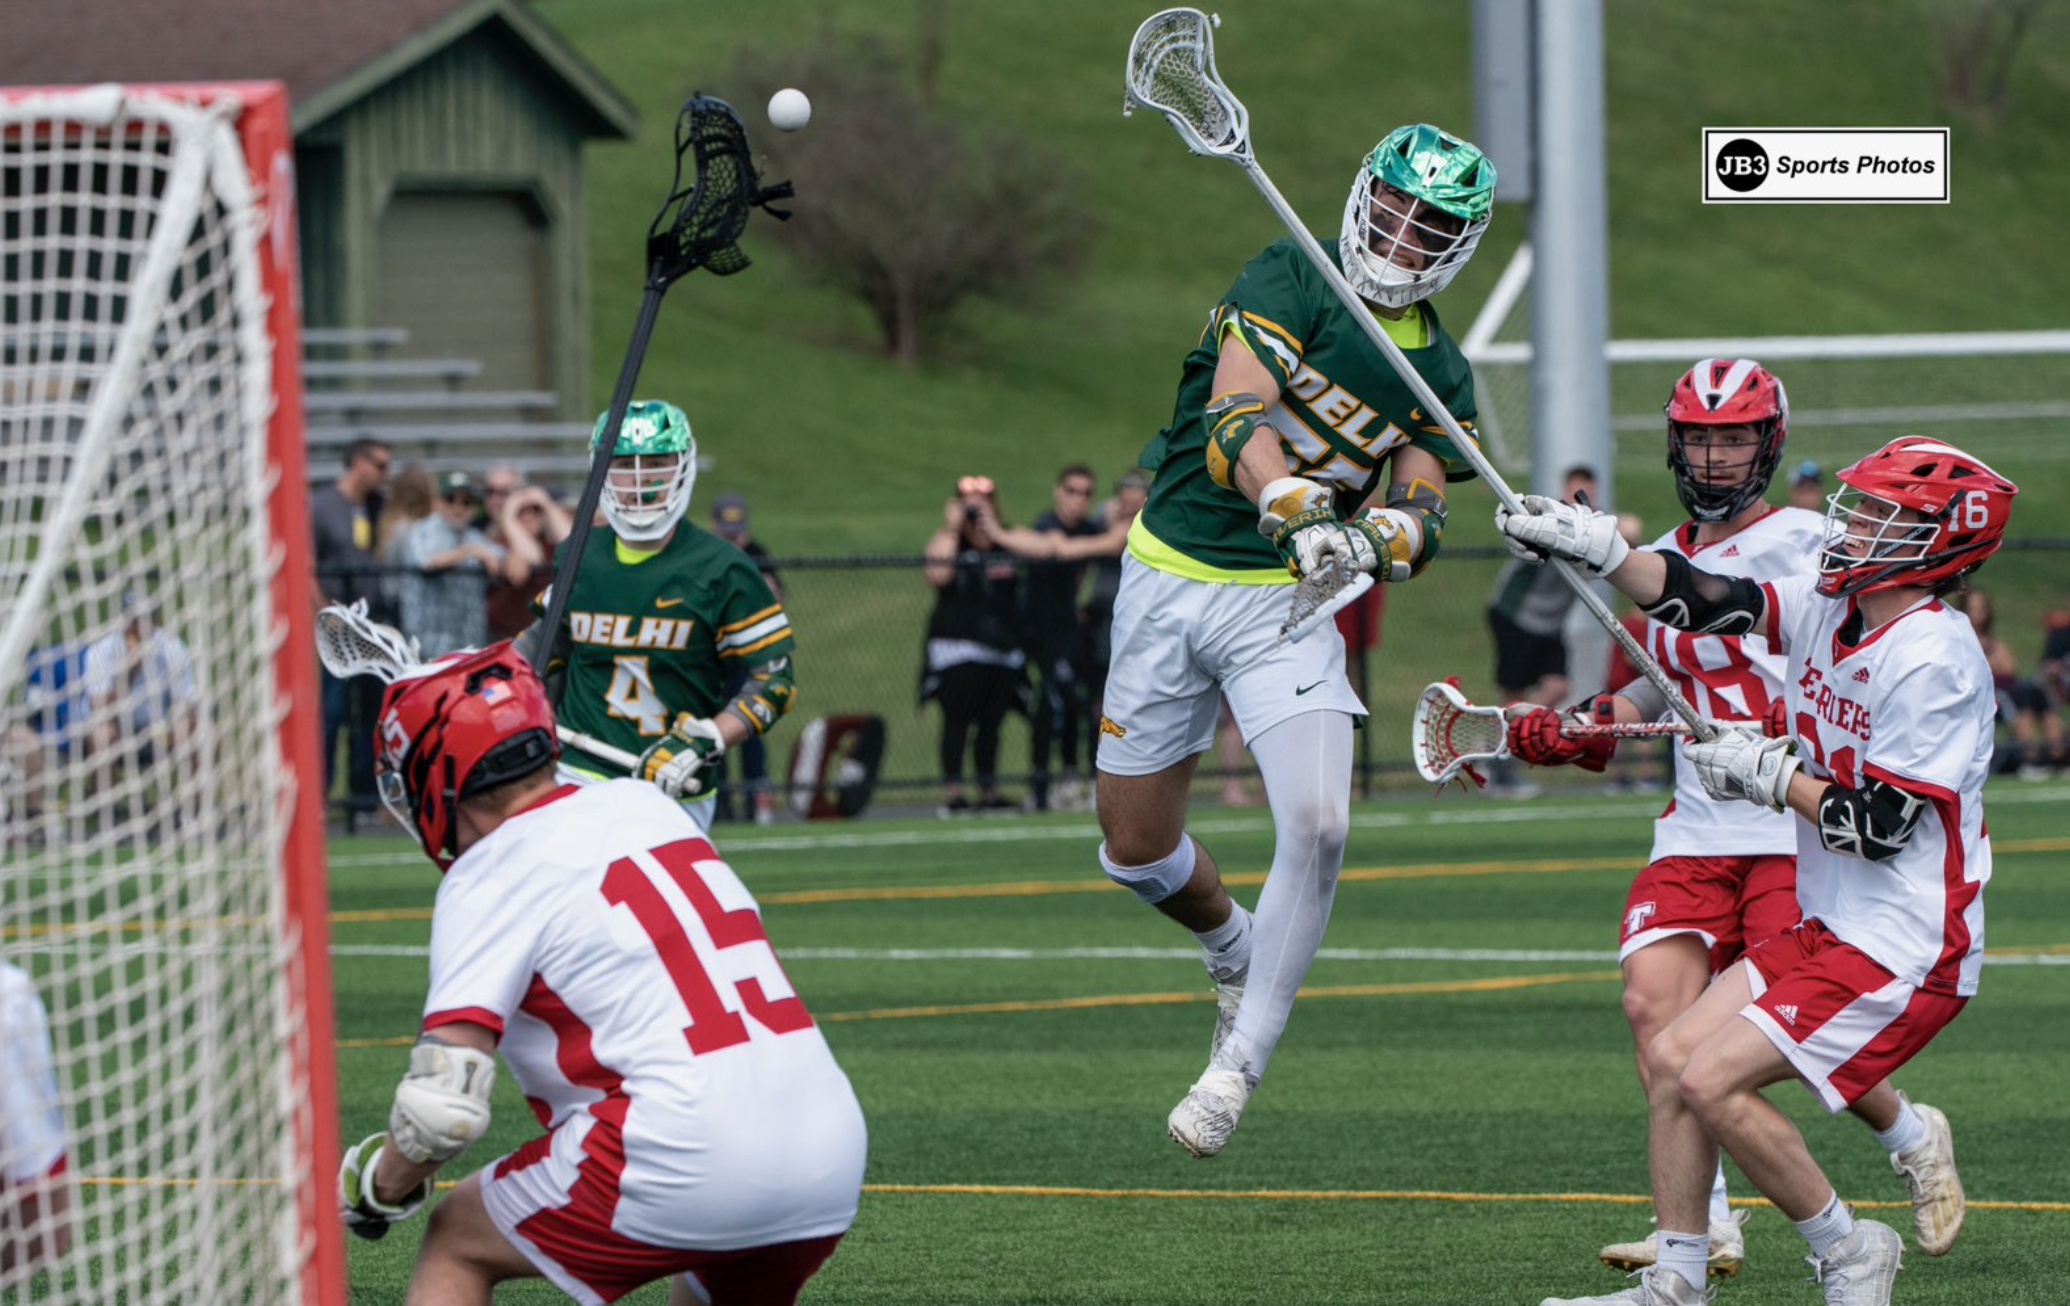 Men's Lacrosse makes it three conference wins in a row after 14-9 victory over Thomas College